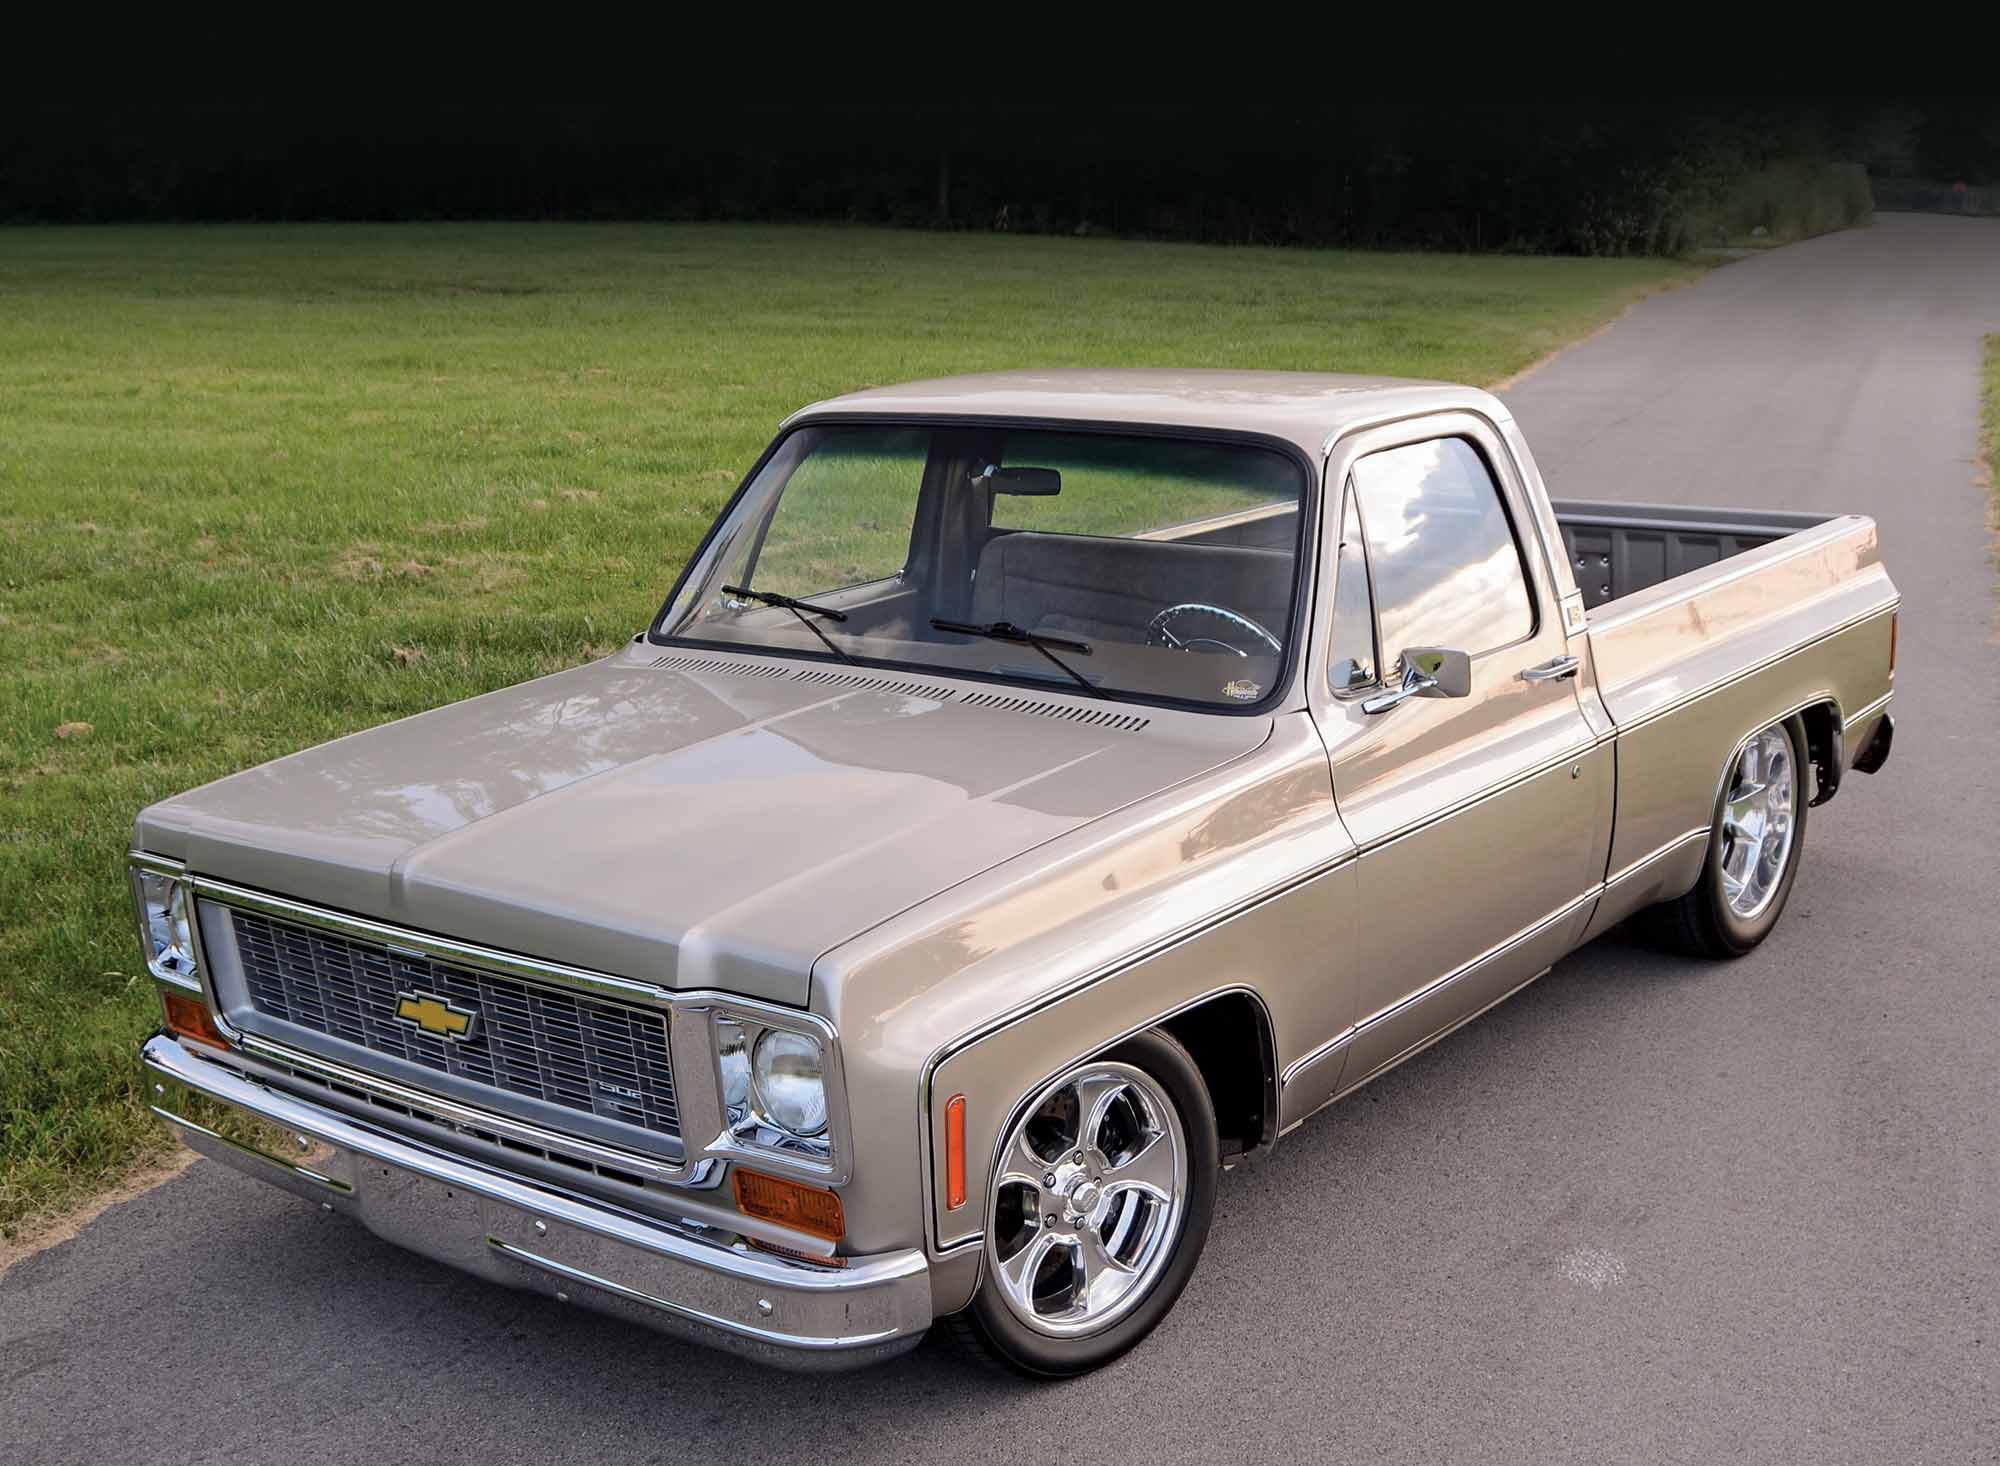 '77 Chevrolet C10 pickup truck 3/4 front view